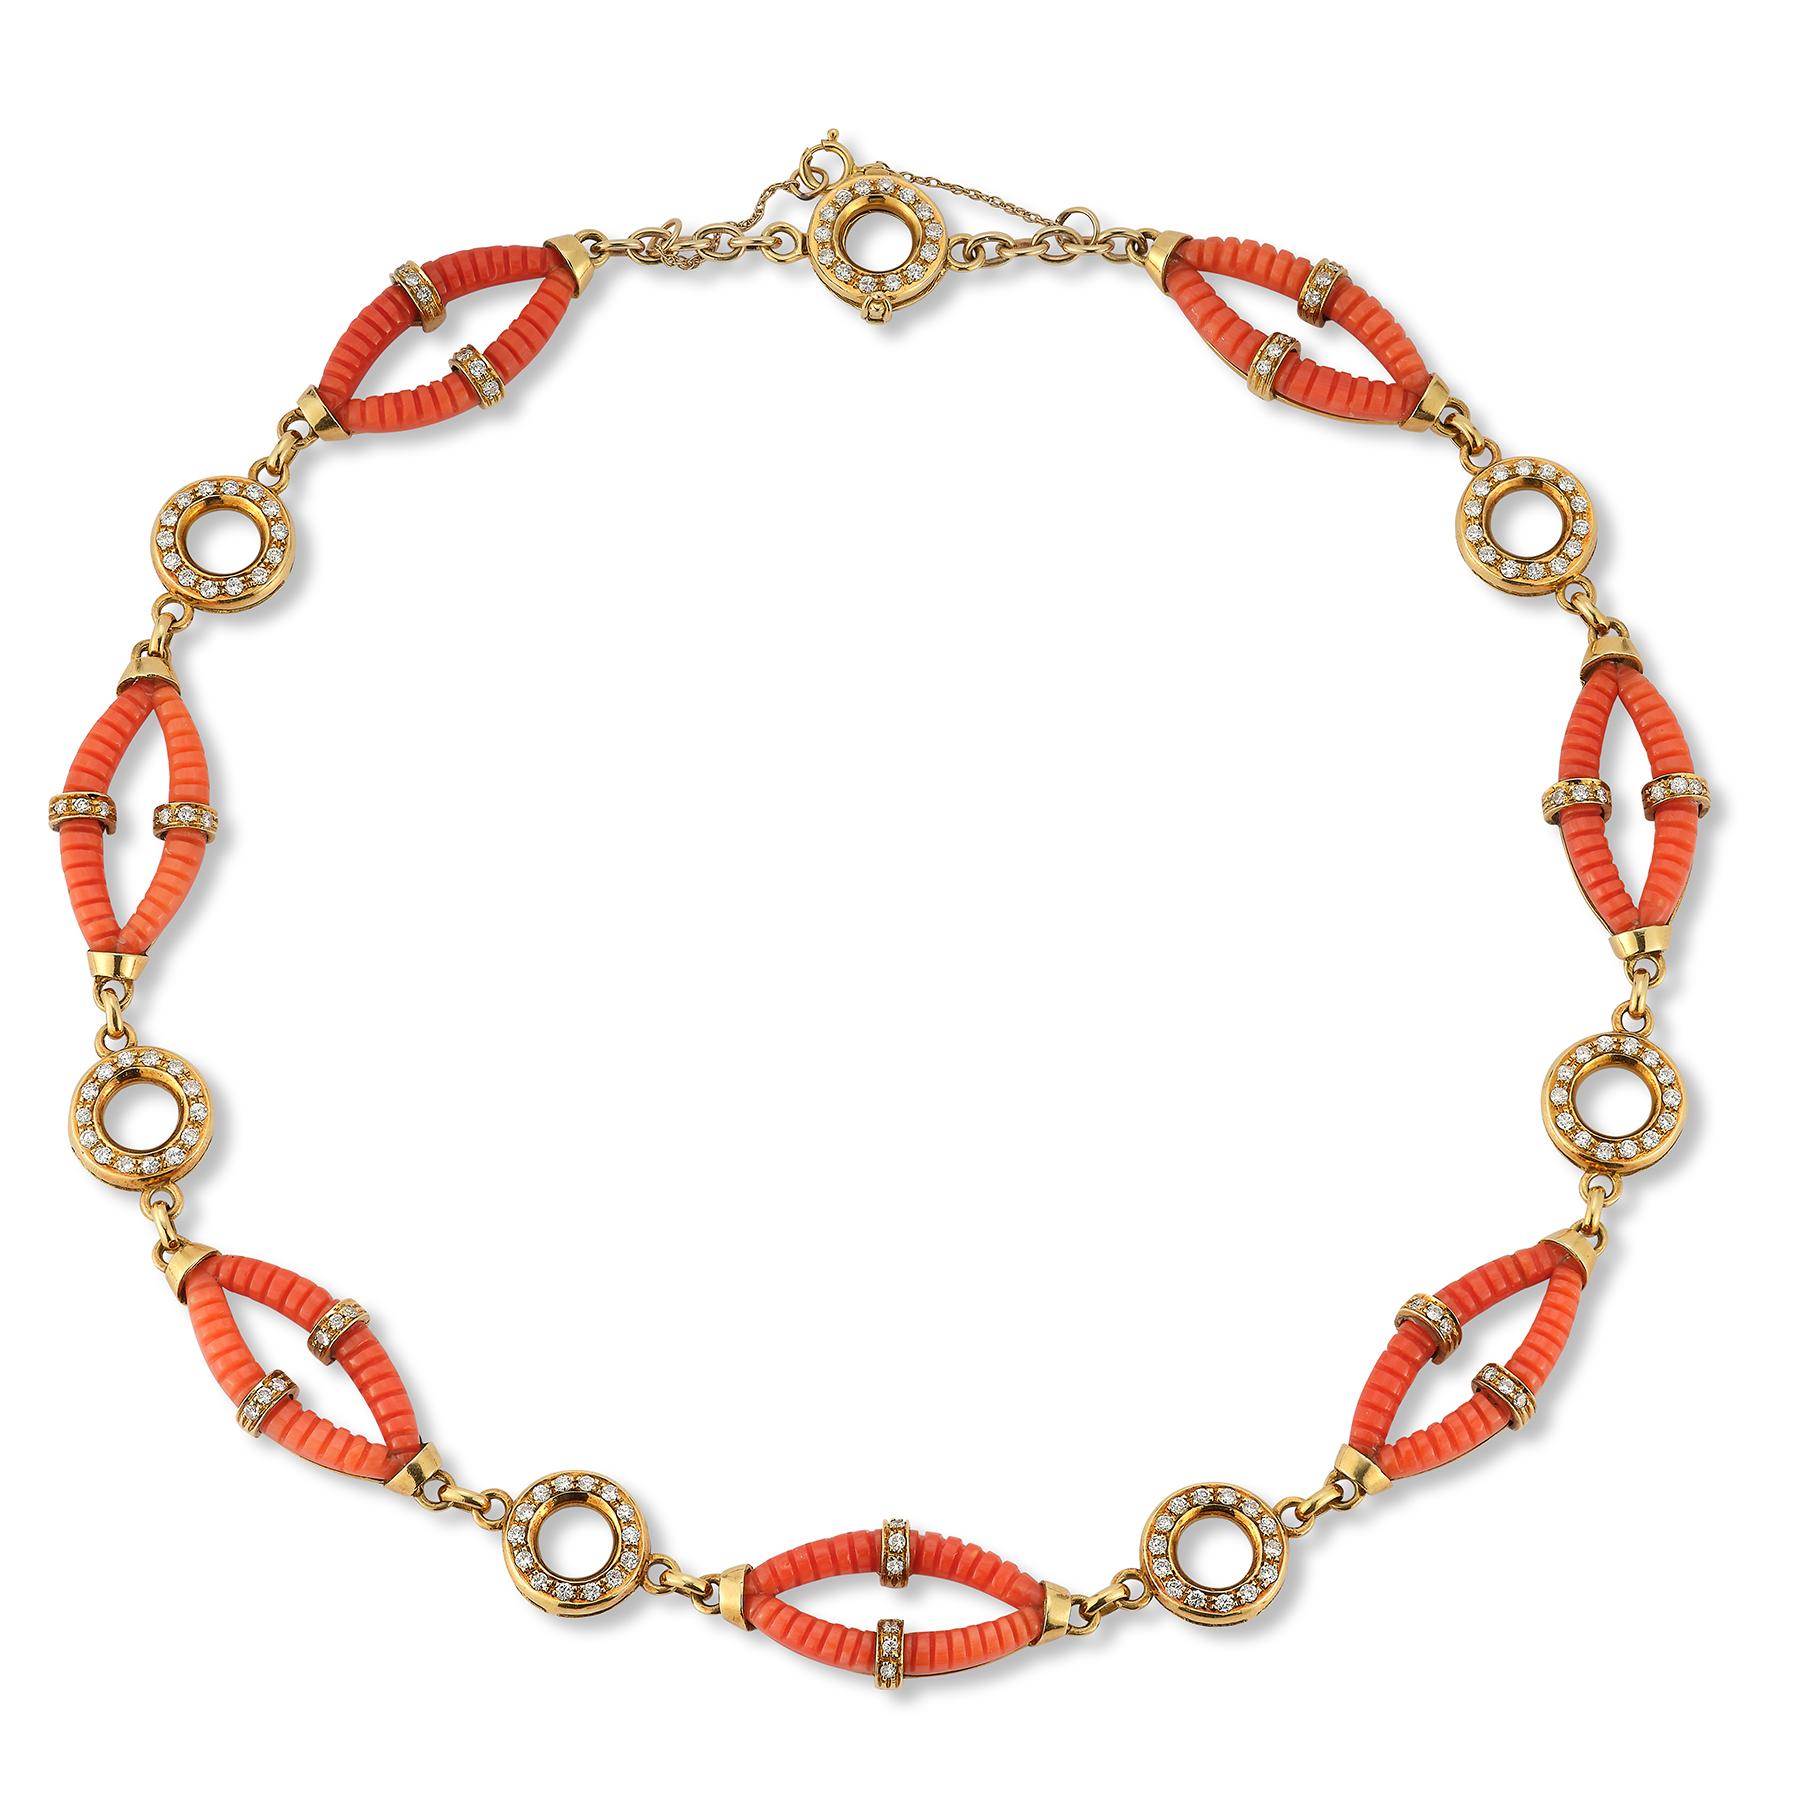 Cartier Coral & Diamond Necklace

Carved coral & round diamond link necklace

Measurements: 16